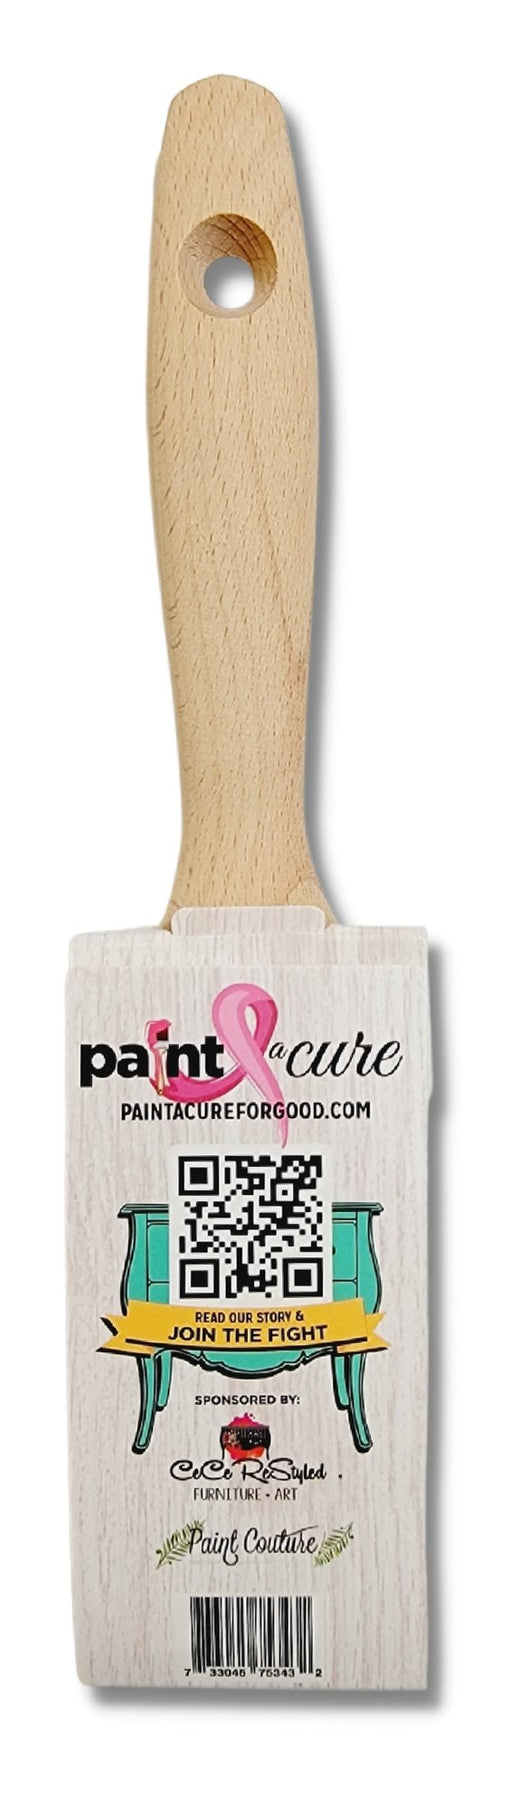 Paint a Cure Paint Brush - Proceeds to Benefit - THE AMERICAN